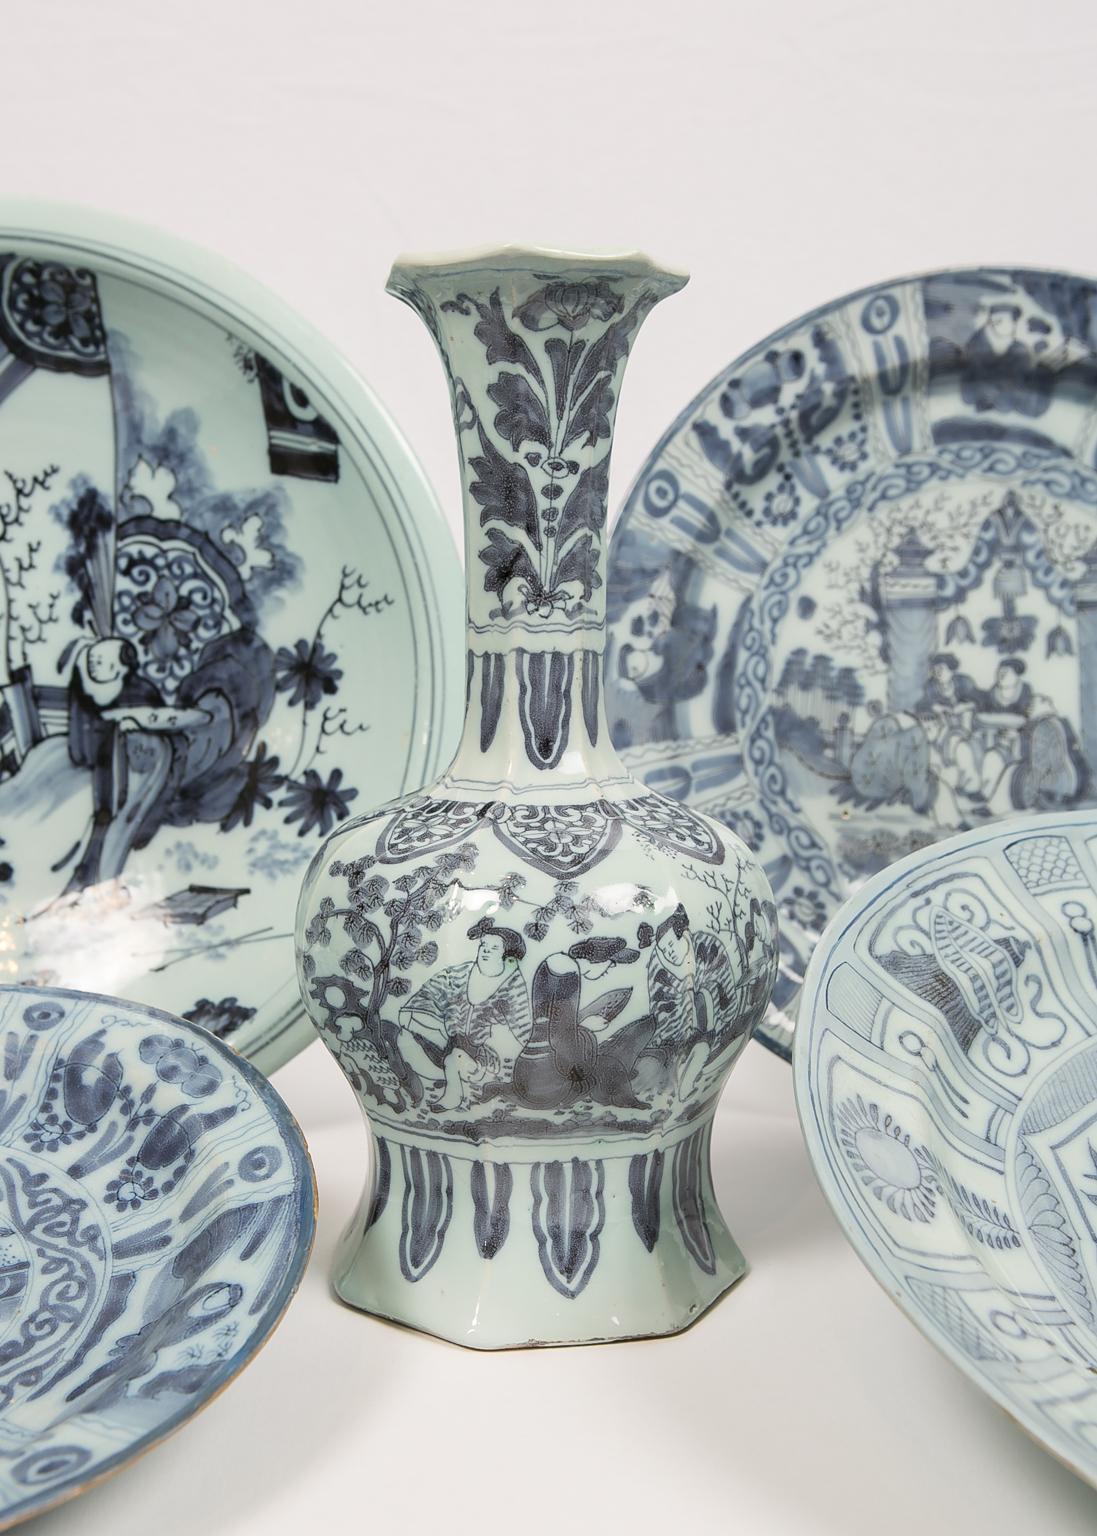 We are pleased to offer this collection of antique Delft with chinoiserie decoration. It has the light cobalt coloring typical of late 17th and very early 18th century Dutch ceramics. On each of these five pieces Delft craftsmen wove Dutch technique